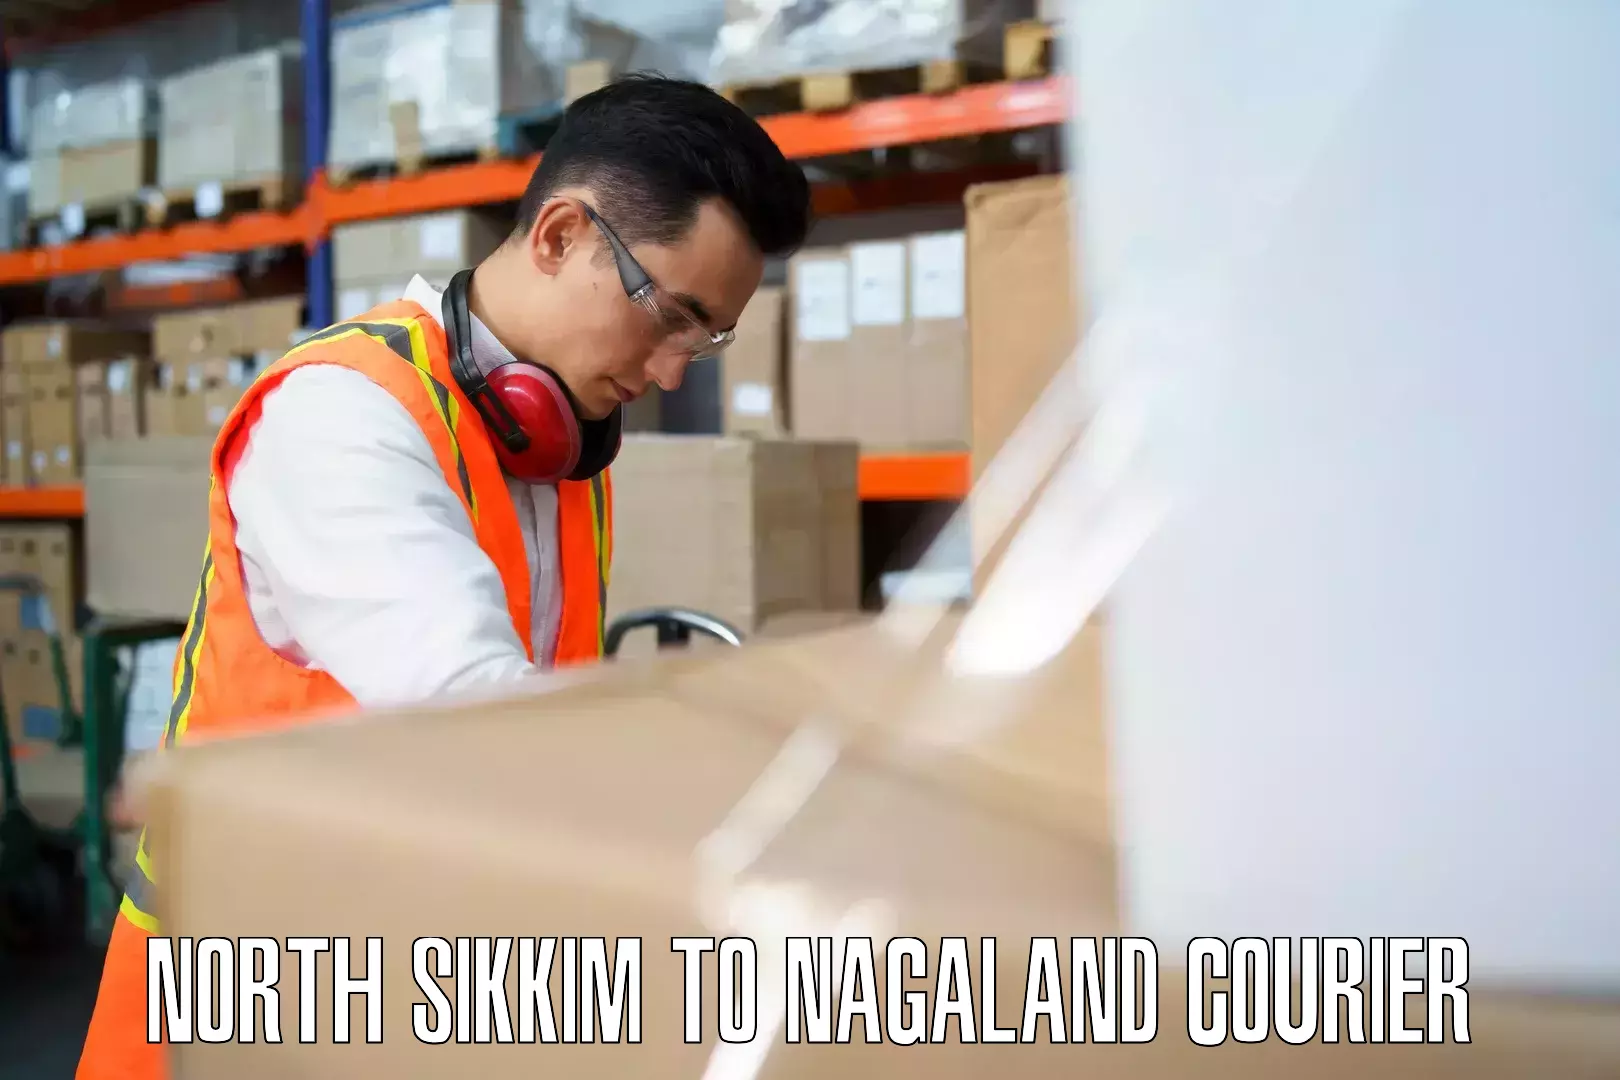 Luggage shipment processing North Sikkim to Nagaland